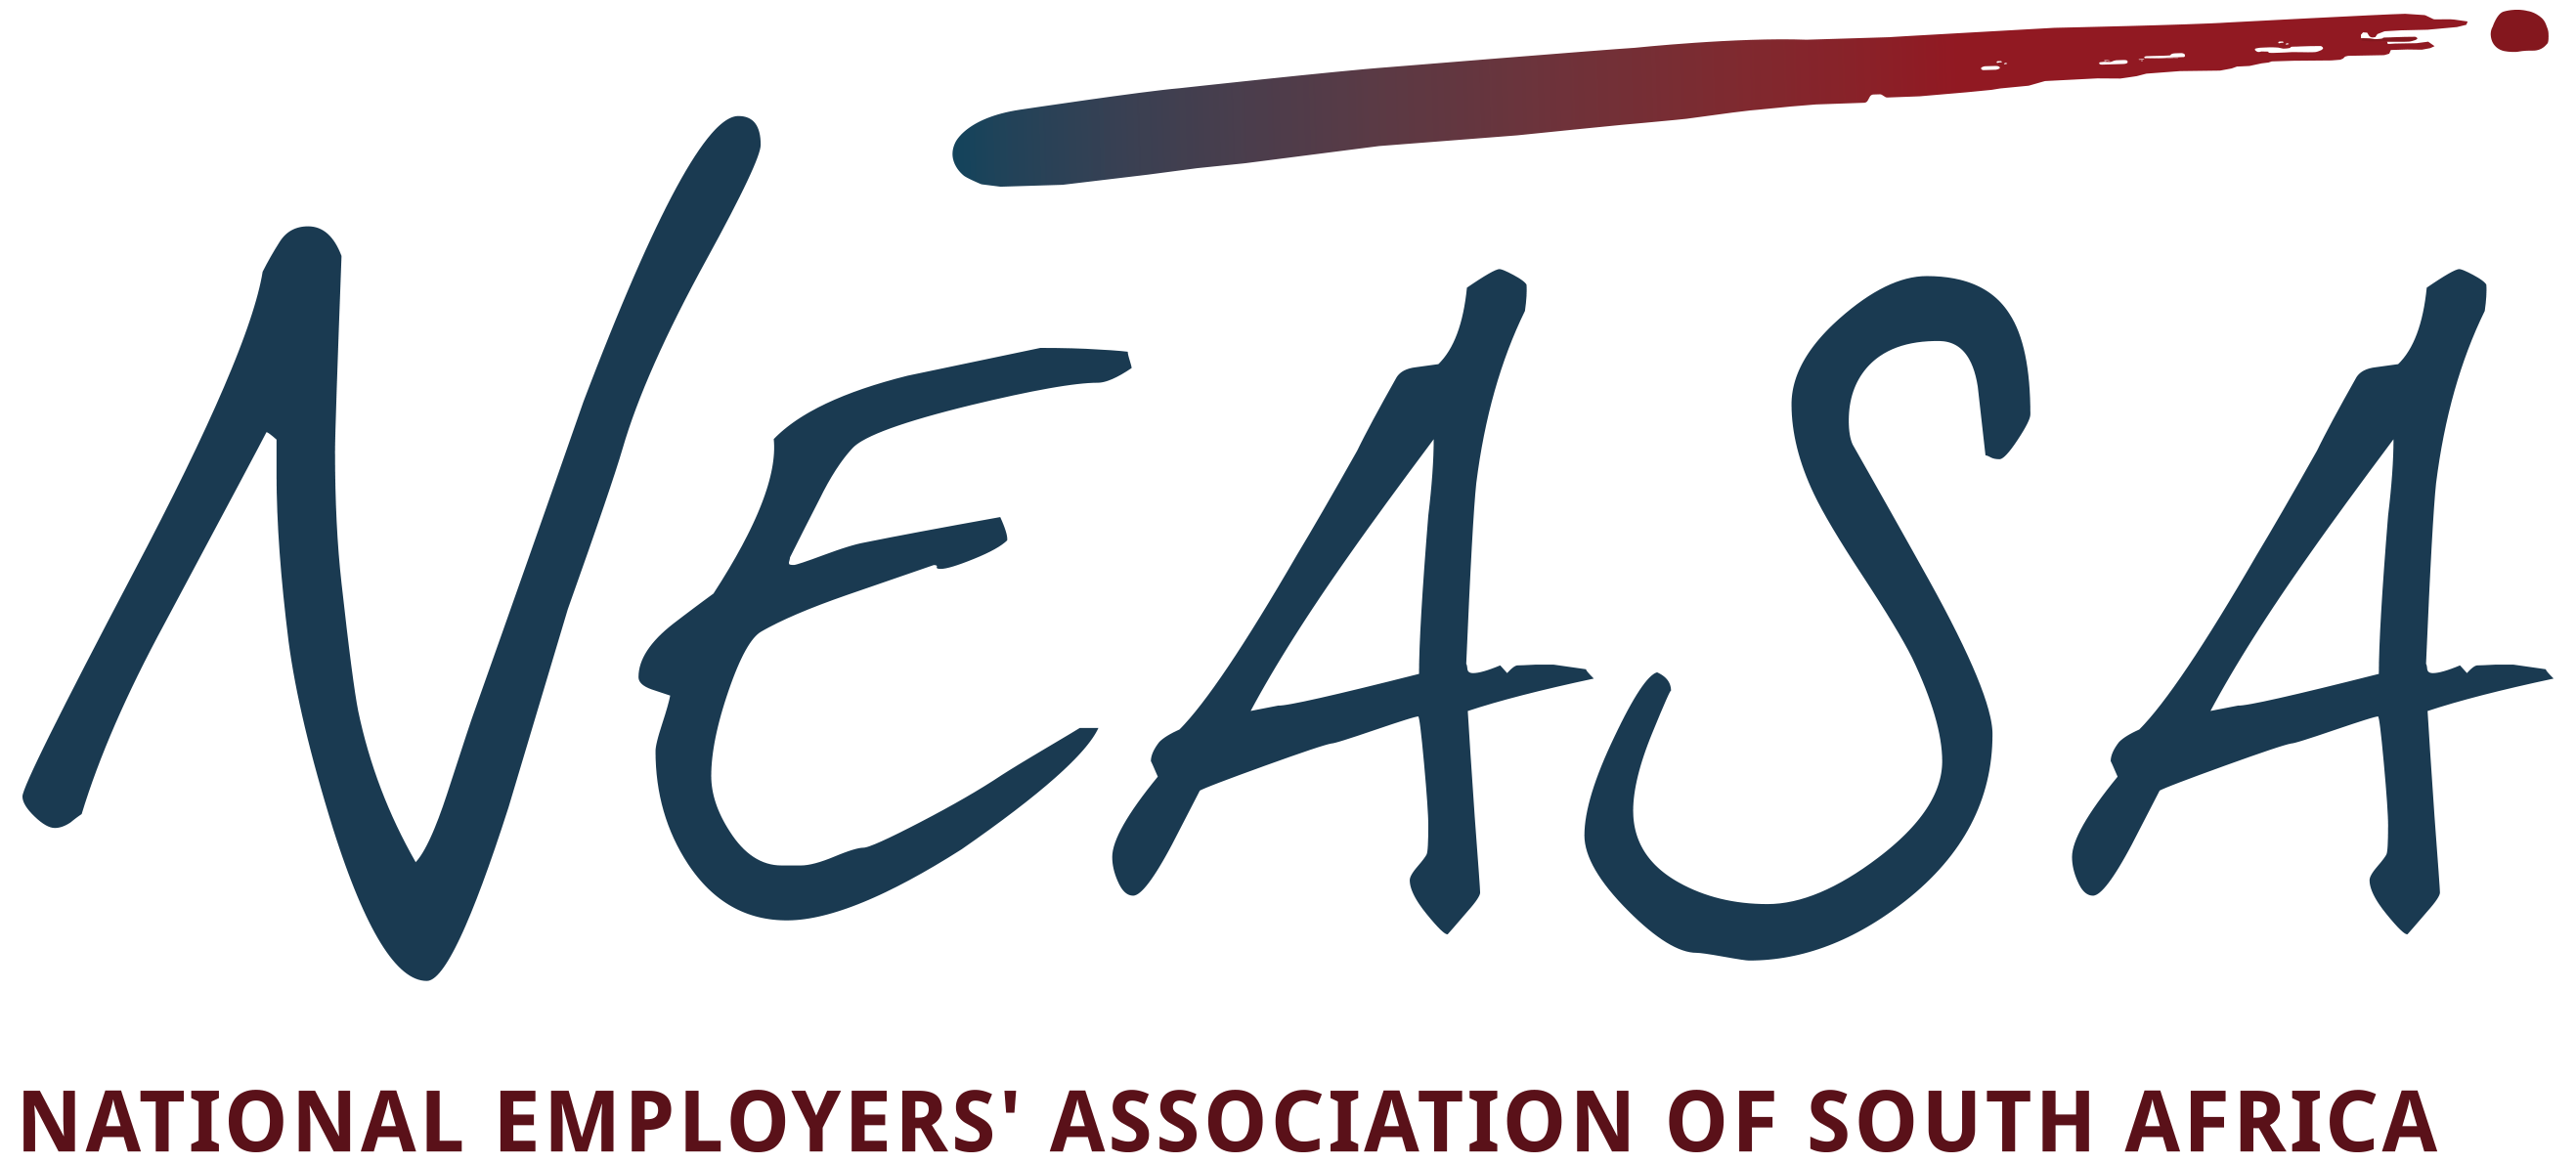 National Employers Association of South Africa - NEASA